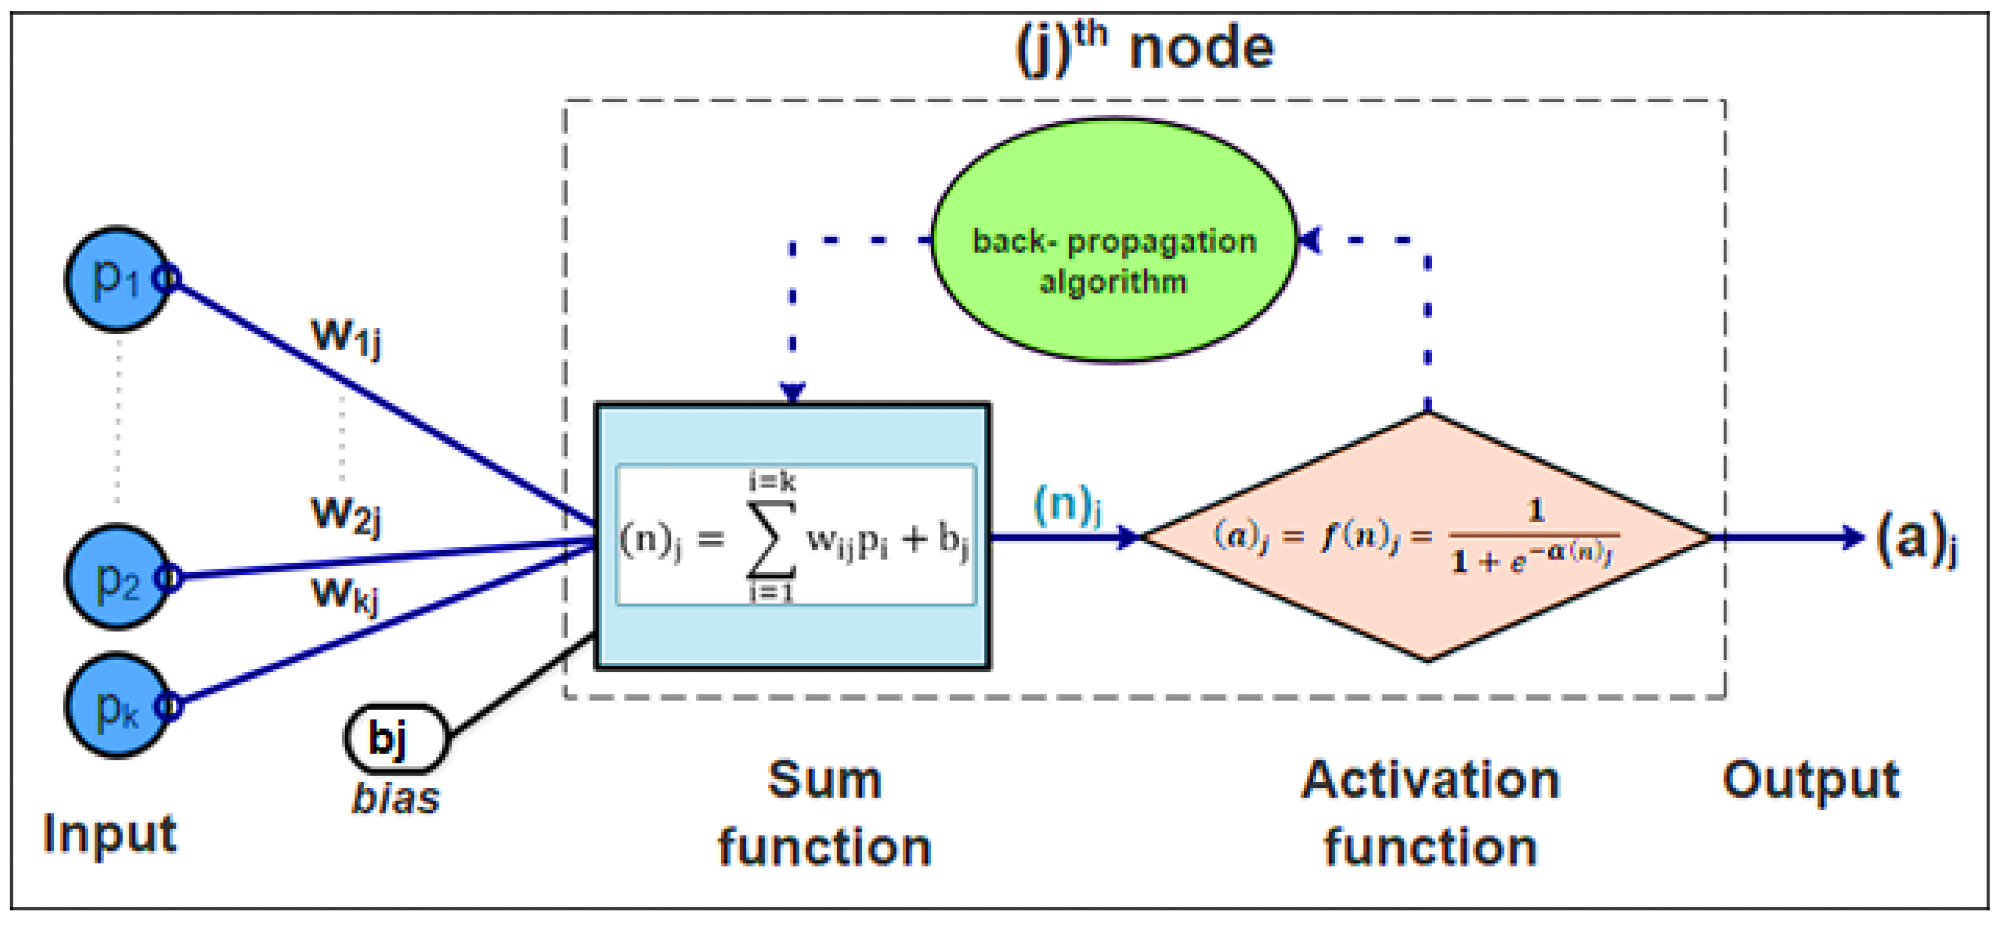 Architecture of artificial node and its interactions in the neural network.